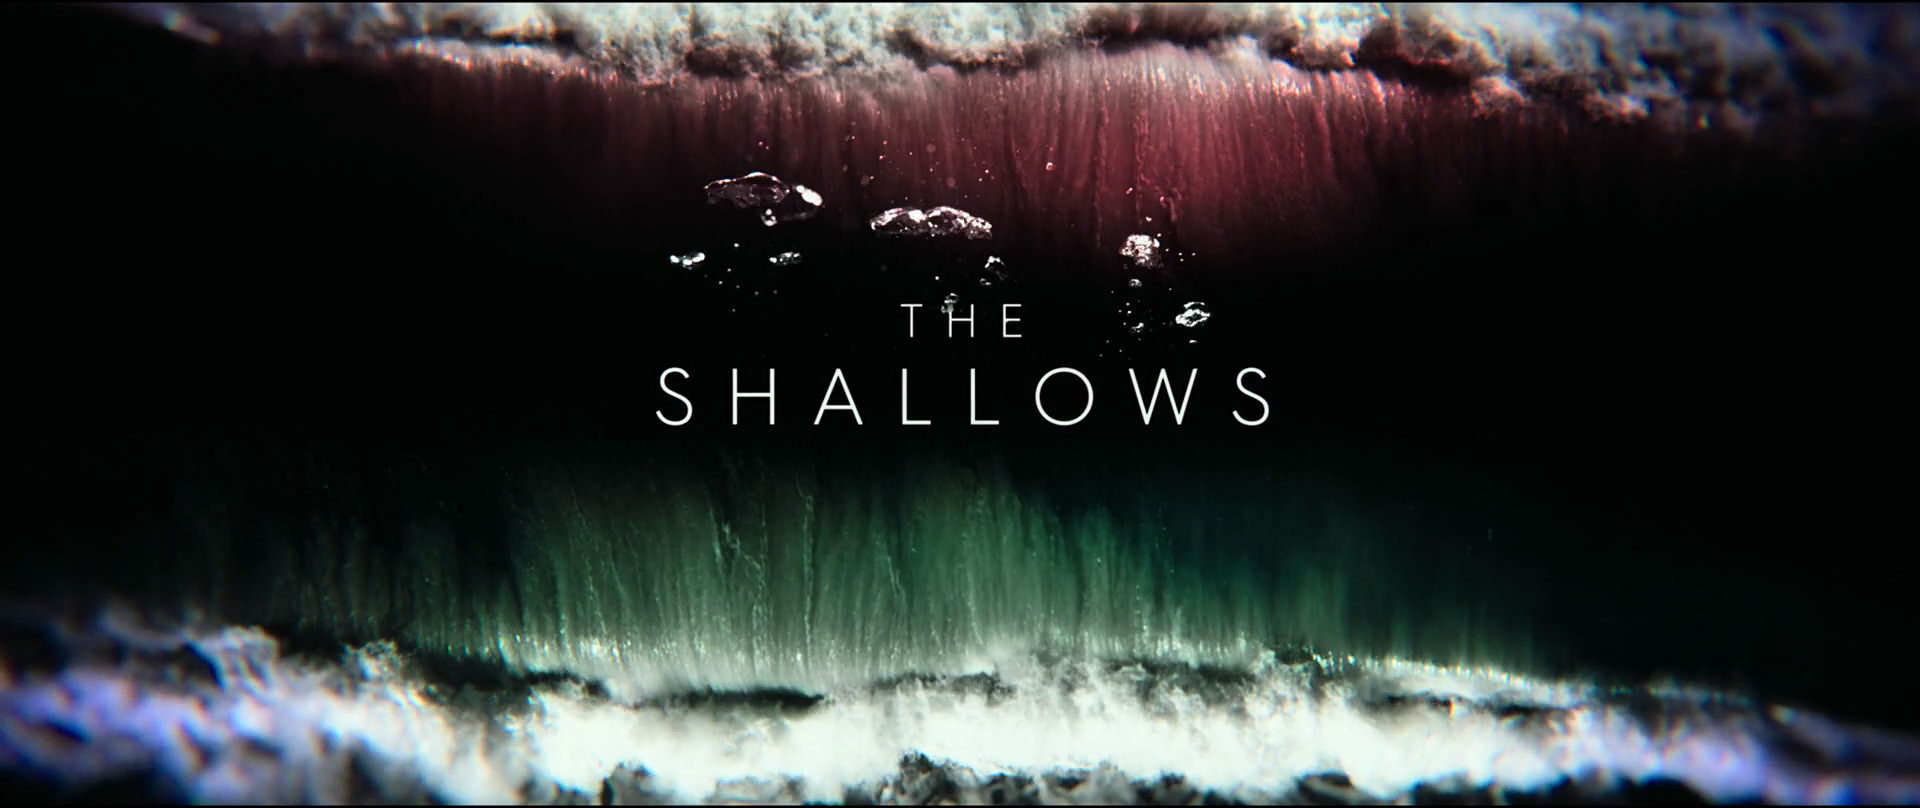 the shallows full movie genvideos